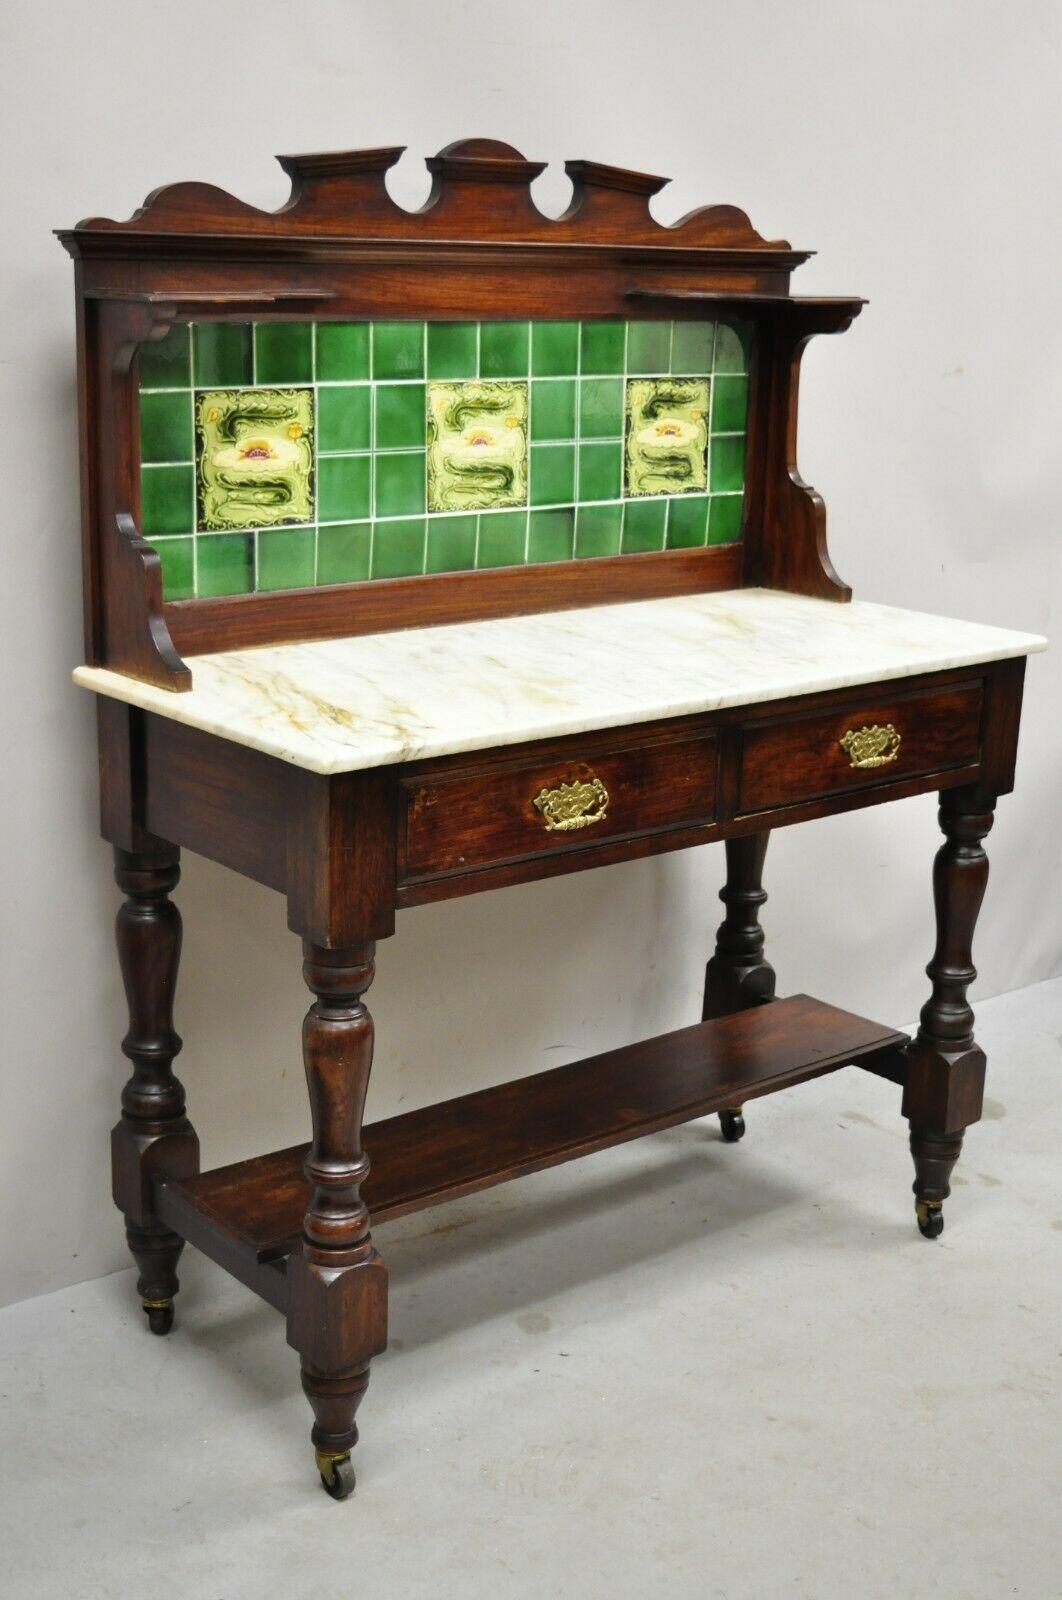 Antique English Victorian green ceramic tile backsplash marble top washstand commode. Item features a green porcelain ceramic title back splash , two small upper shelves, white marble top, lower shelf turned carved legs, 2 dovetailed drawers, solid